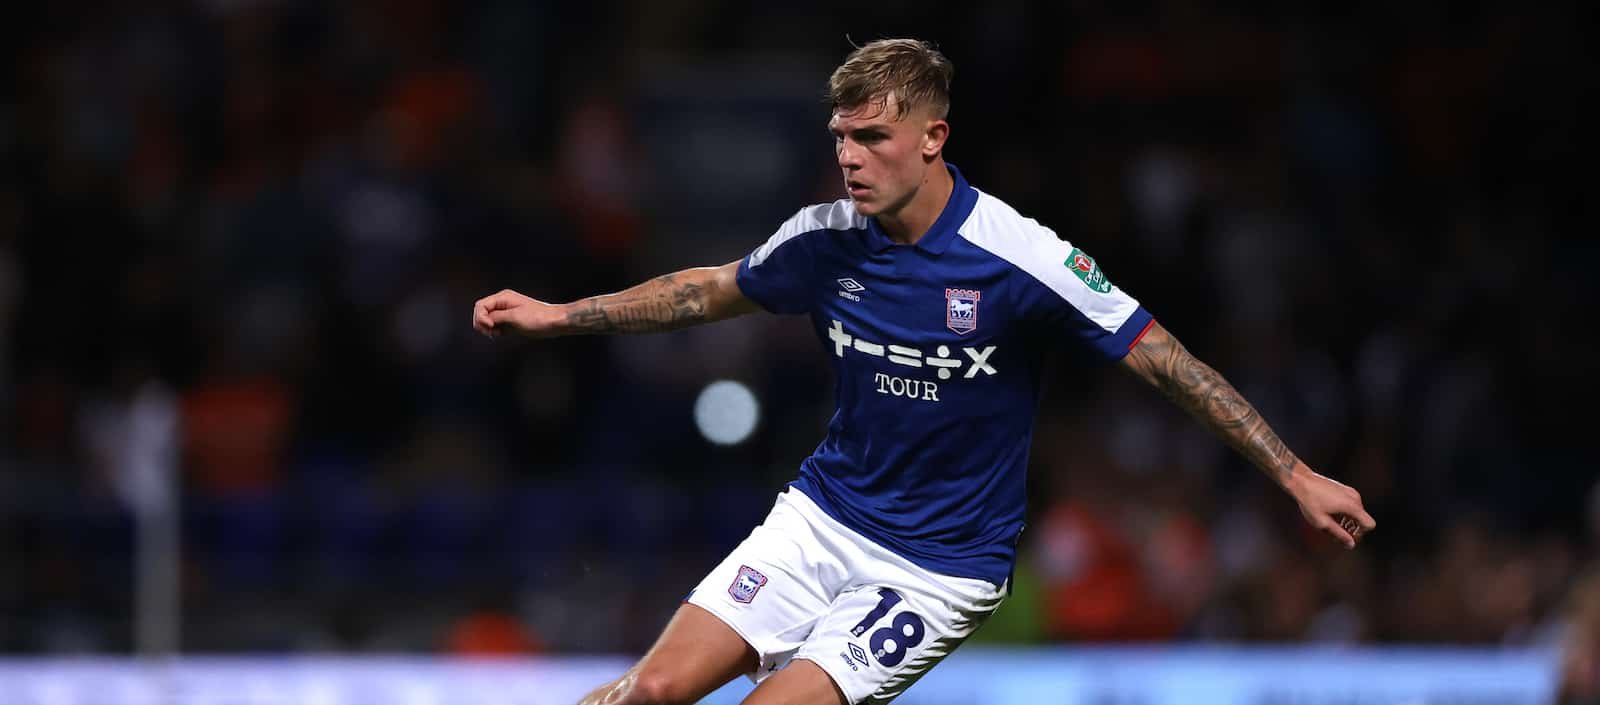 Brandon Williams scores sensational solo goal to lift high-glying Ipswich Town over Preston – Man United News And Transfer News